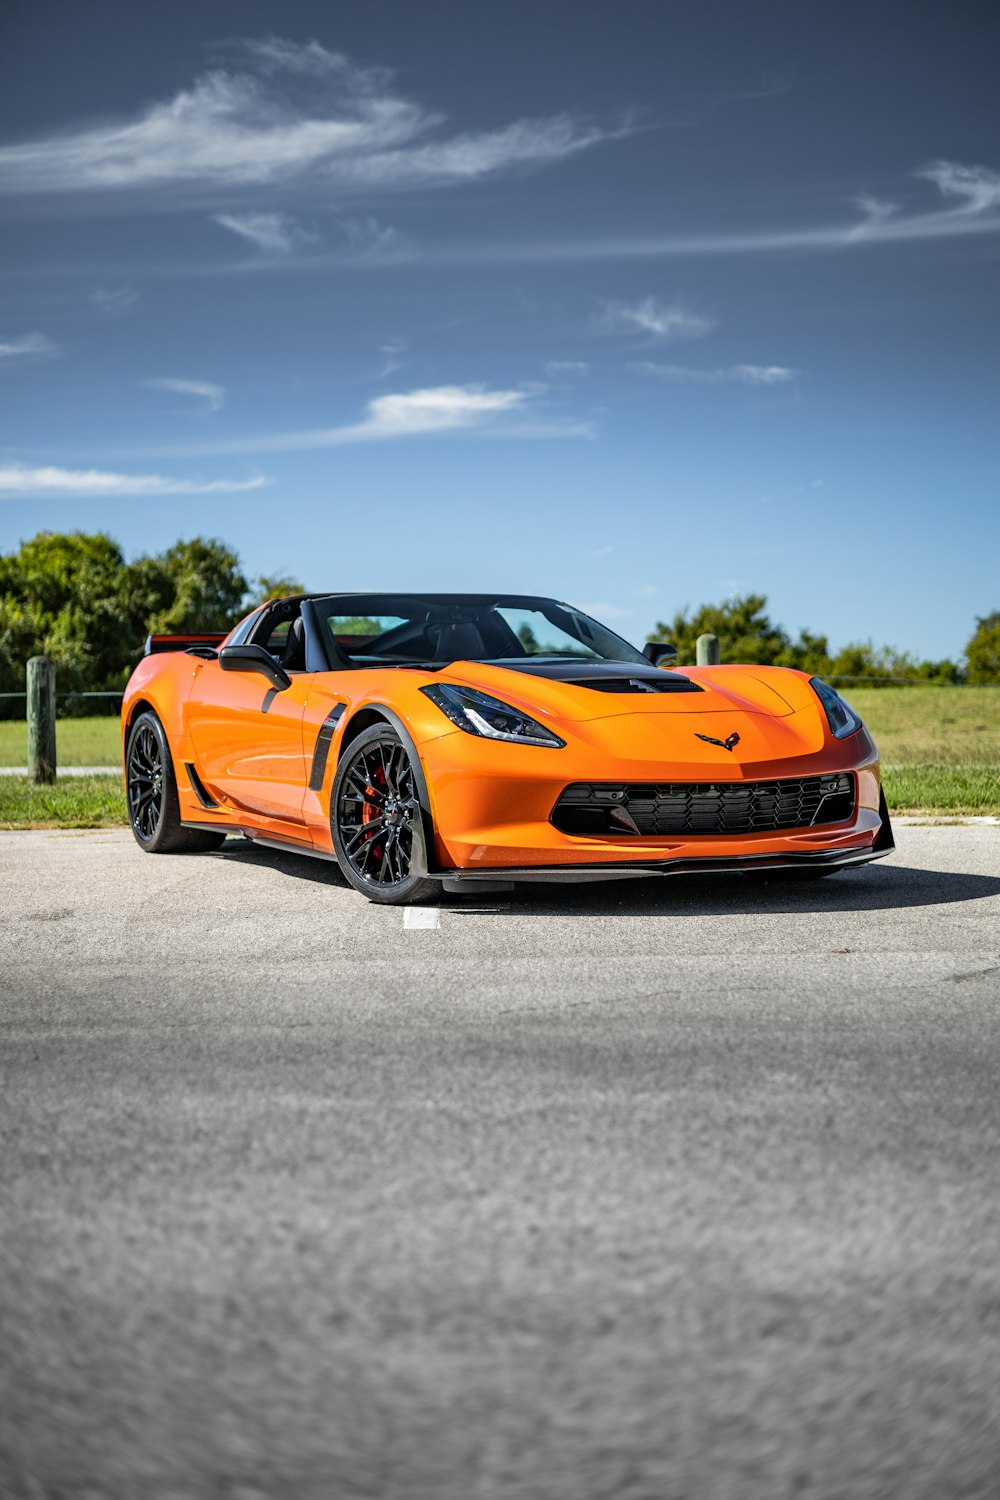 an orange sports car parked on the side of the road